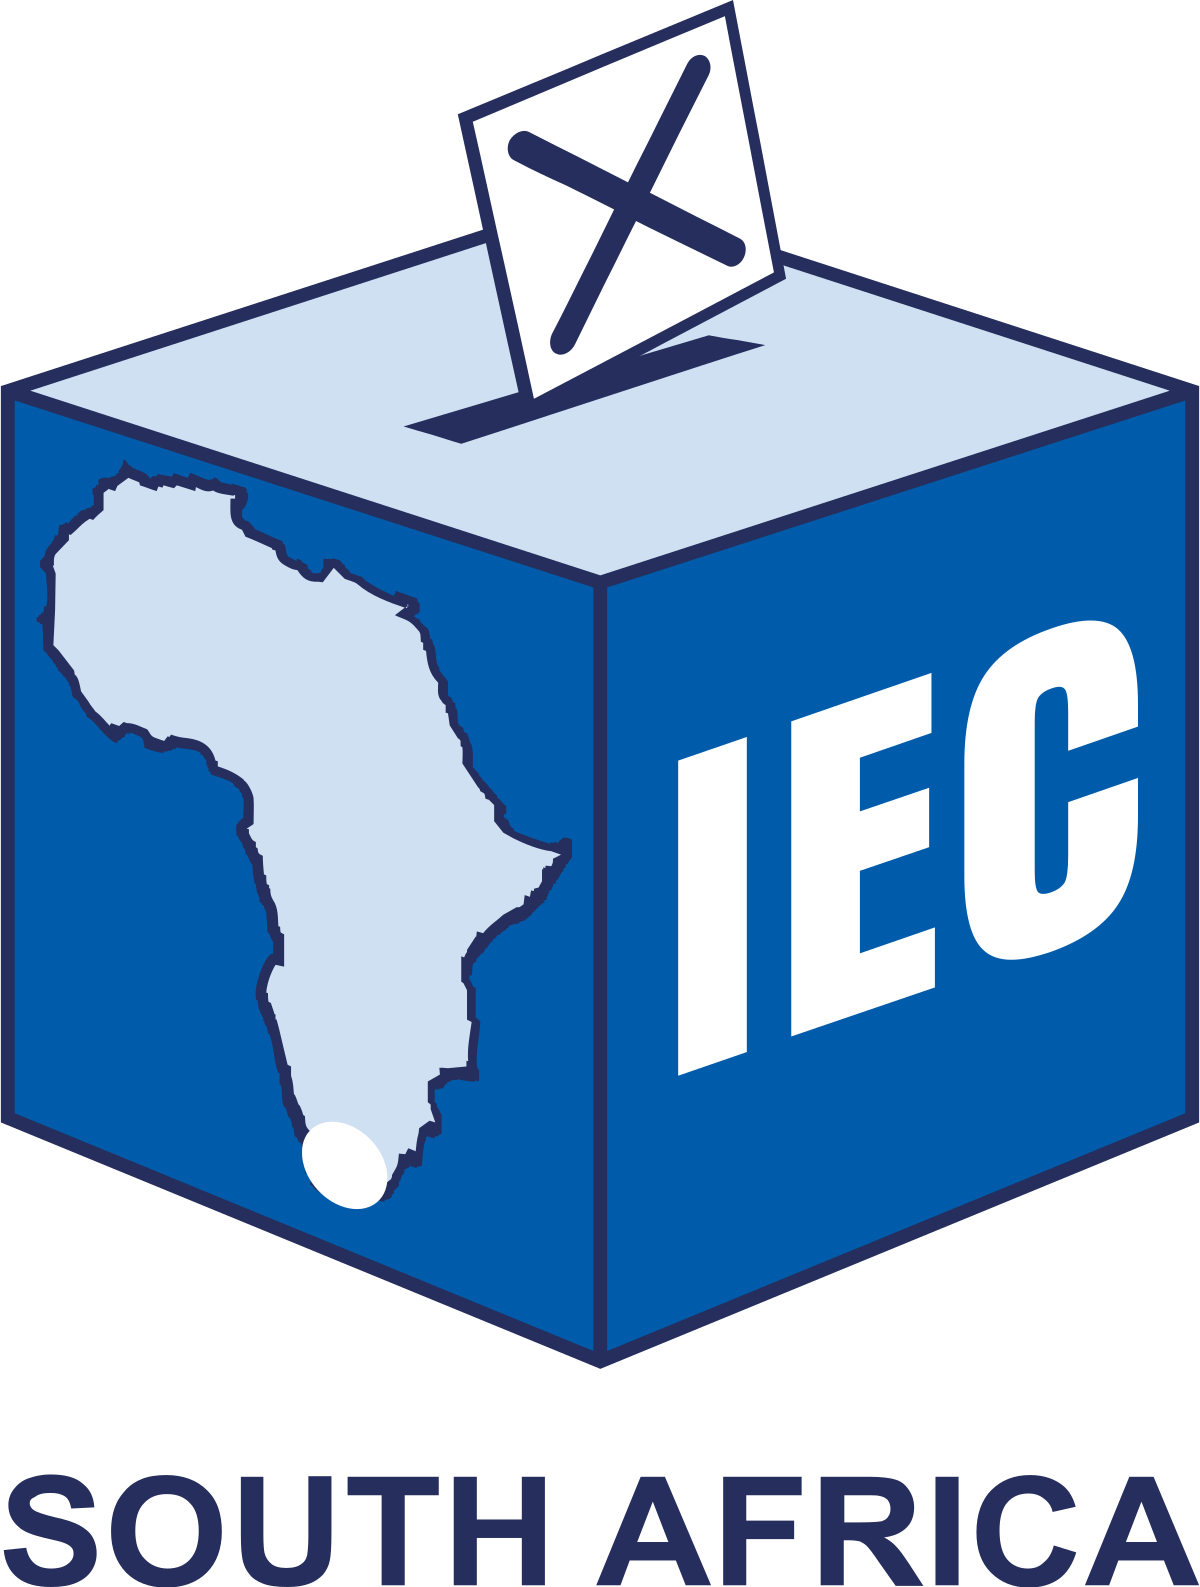 Your Voting Stations - Iec South Africa Logo (1200x1587)